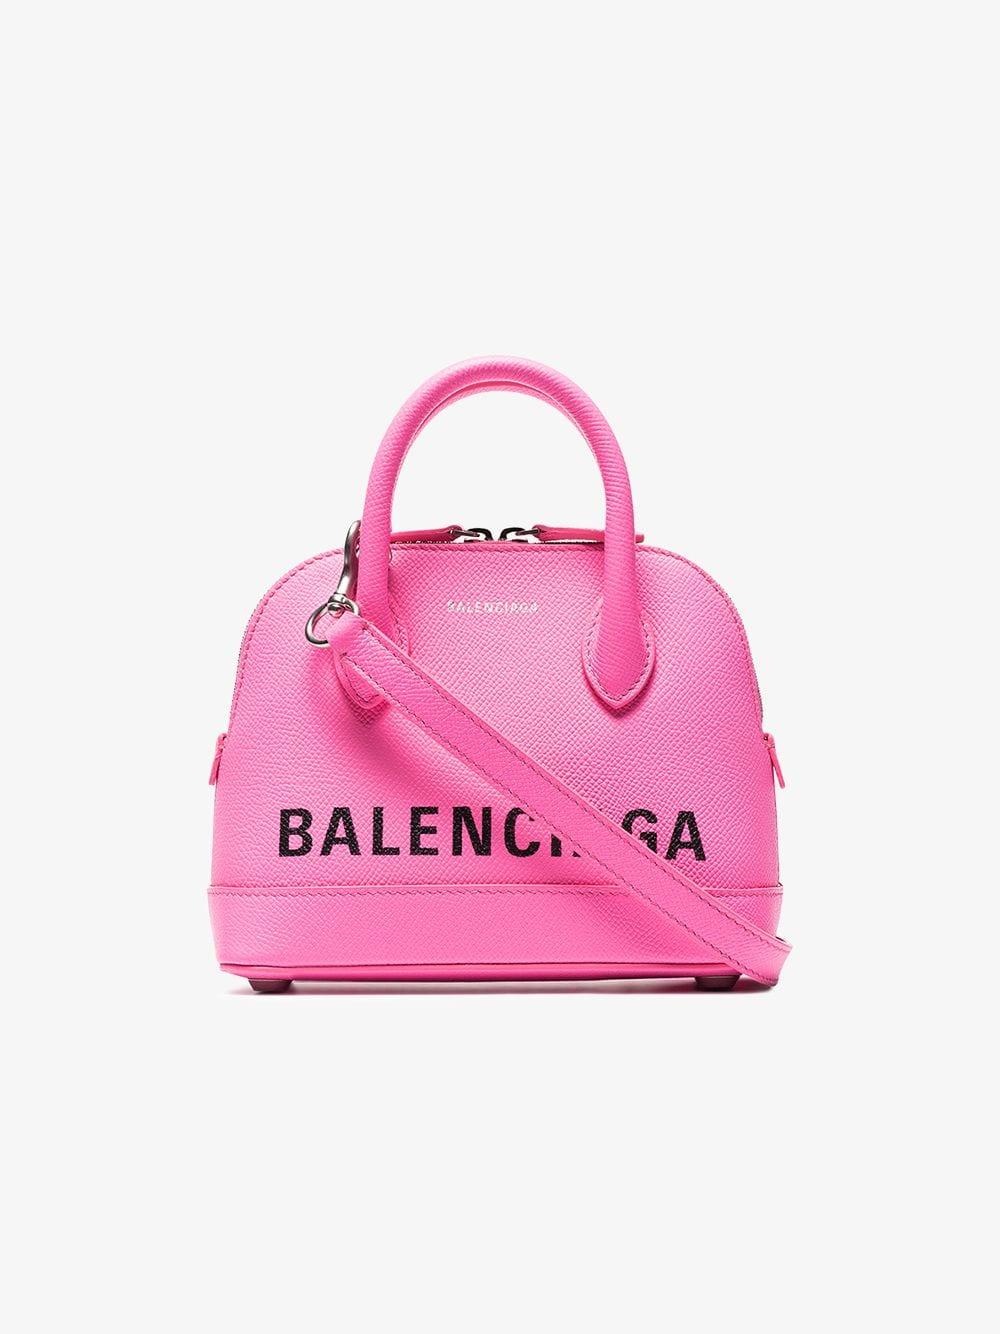 Balenciaga Xxs Ville Leather Top Handle Bag in Pink | Lyst